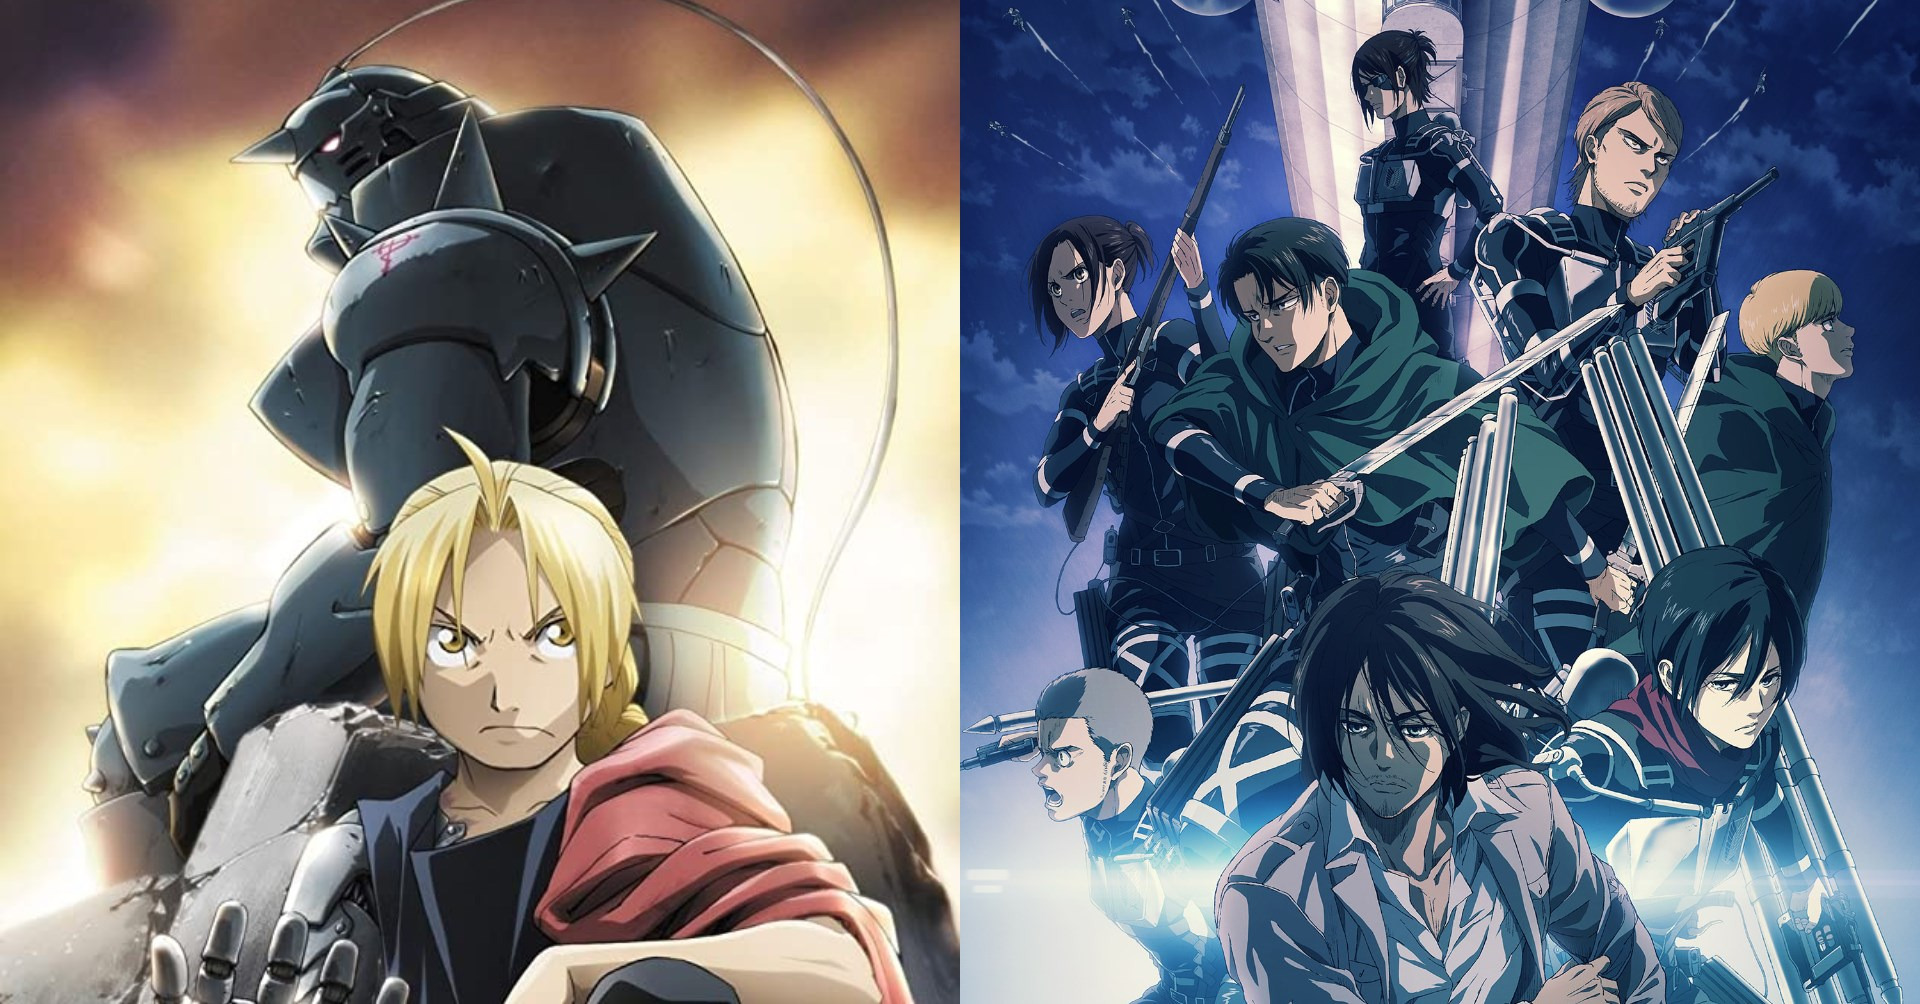 Attack on Titan Catches Up To Fullmetal Alchemist As The Highest Rated Anime  On MyAnimeList - Anime Corner